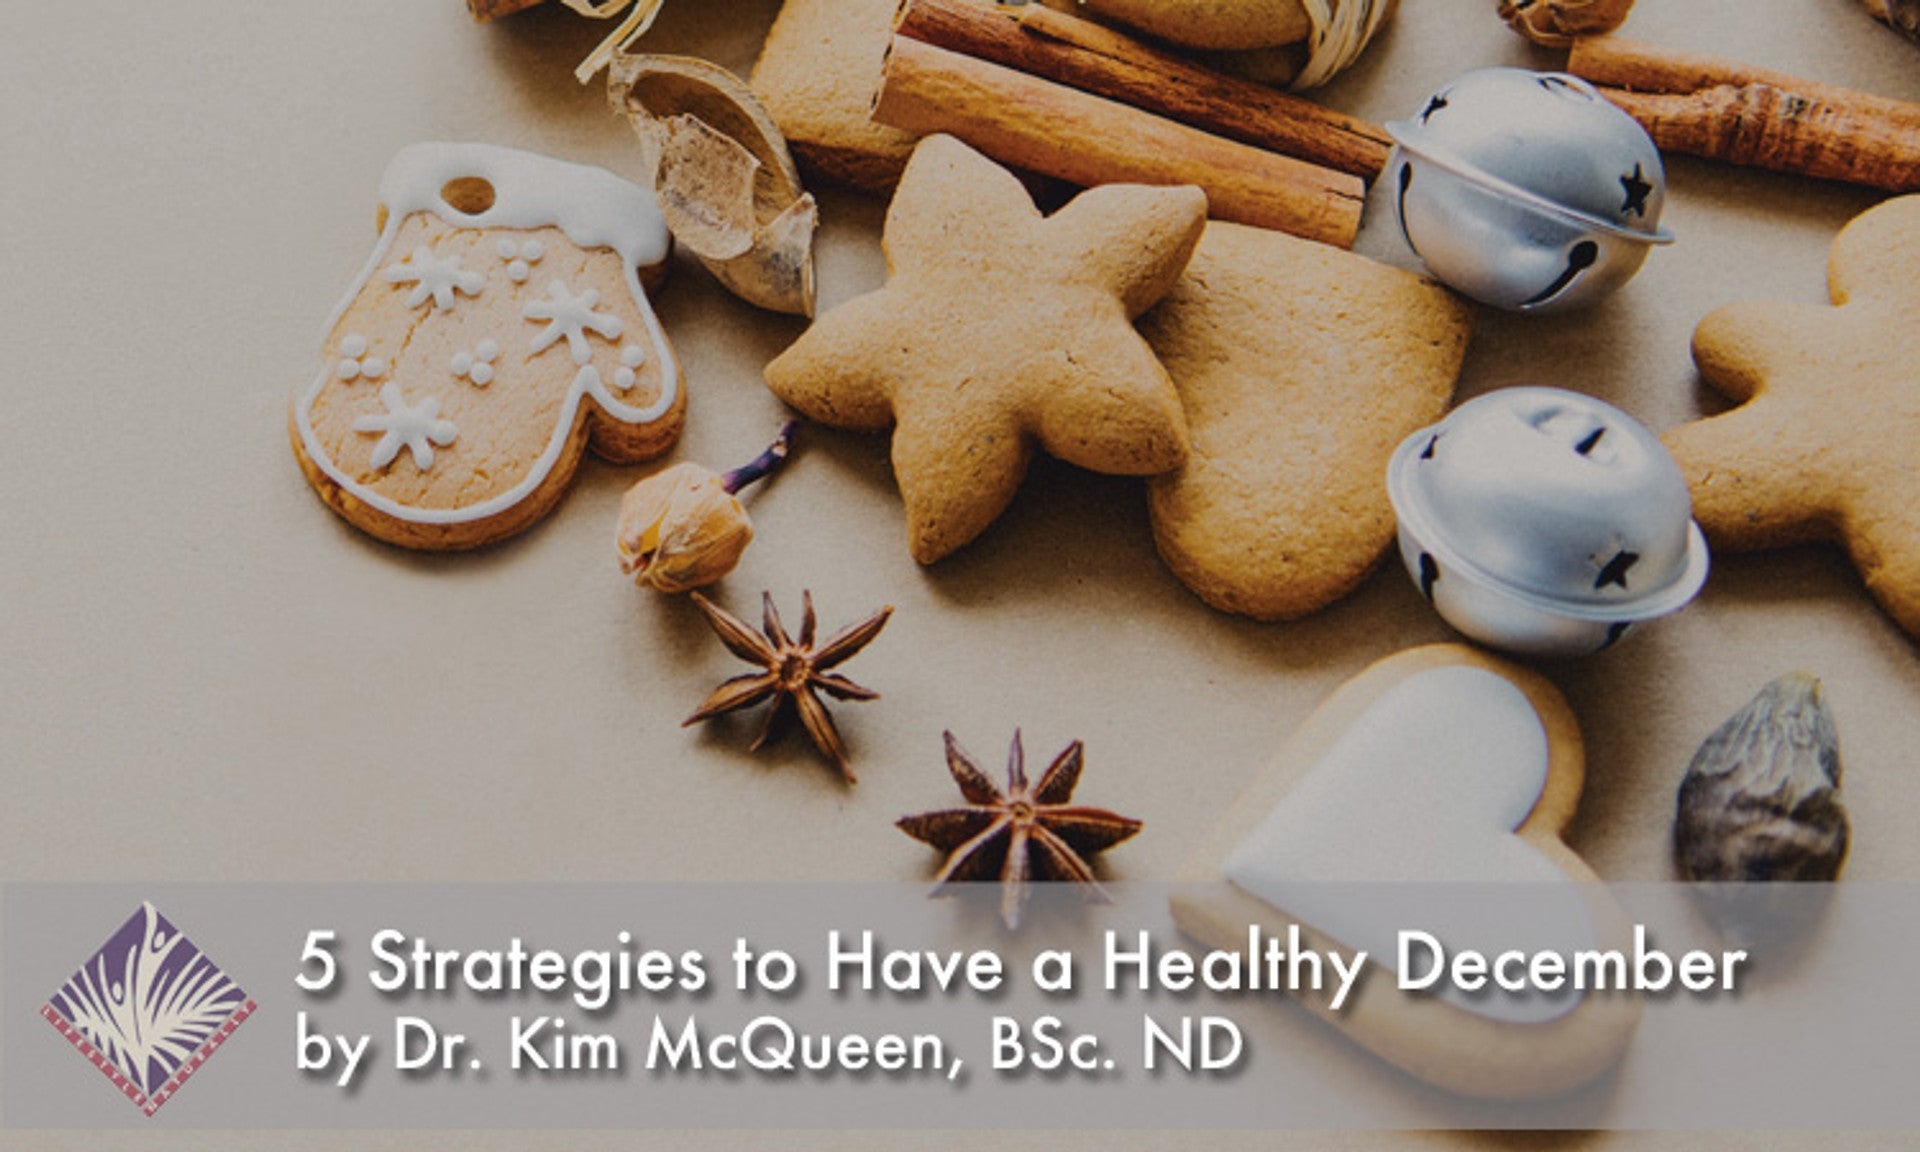 5 Strategies to Have a Healthy December